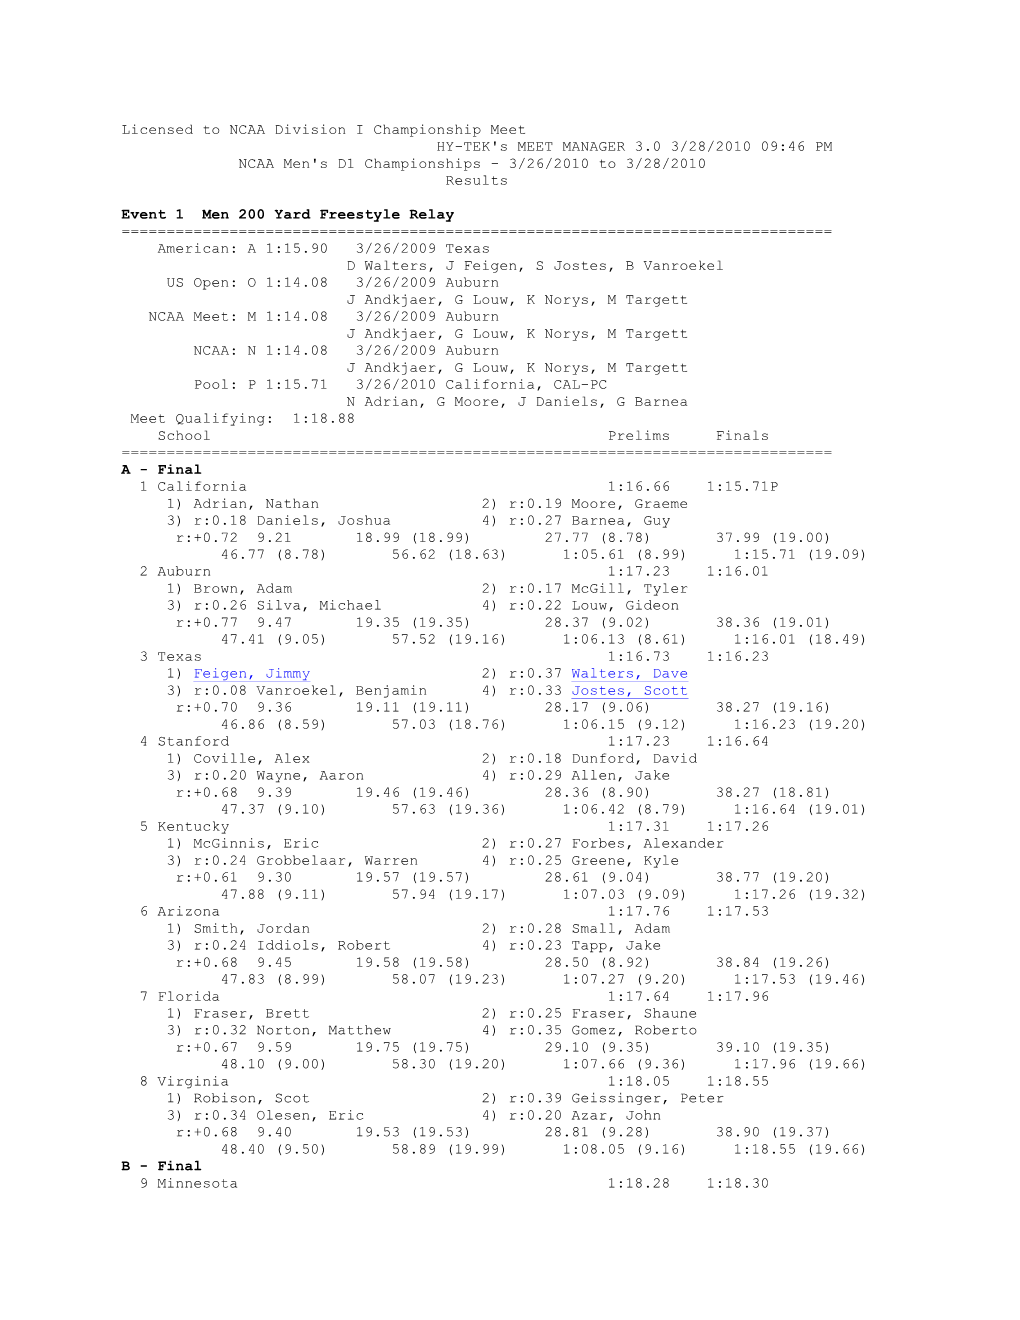 Licensed to NCAA Division I Championship Meet HY-TEK's MEET MANAGER 3.0 3/28/2010 09:46 PM NCAA Men's D1 Championships - 3/26/2010 to 3/28/2010 Results